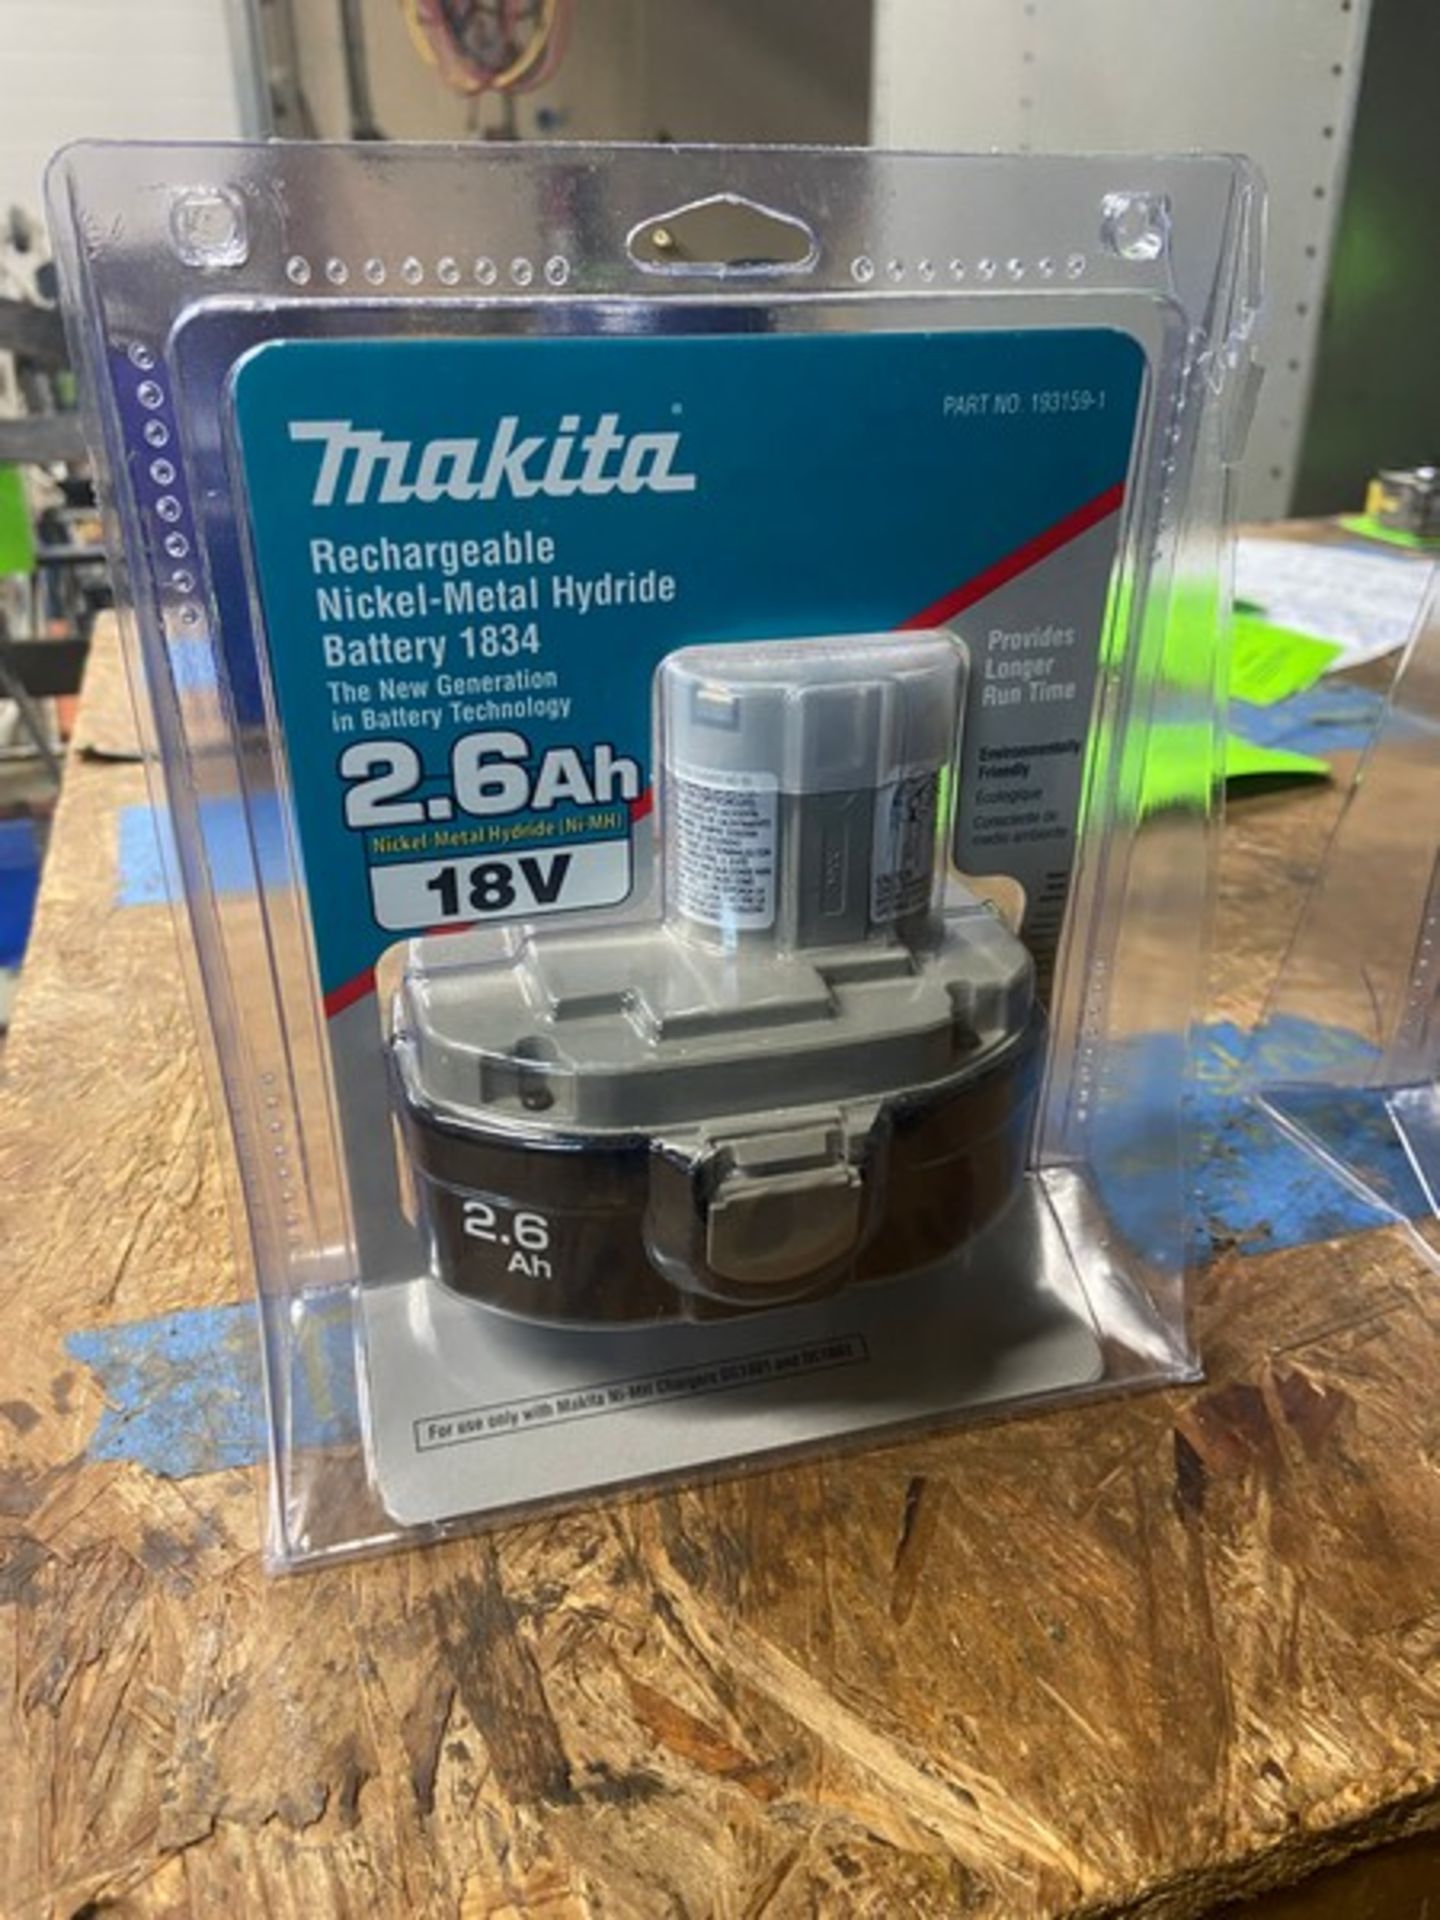 NEW Makita Regardeable Nickel-Metal Hydride Battery 1834, 18 Volts (LOCATED IN MONROEVILLE, PA)